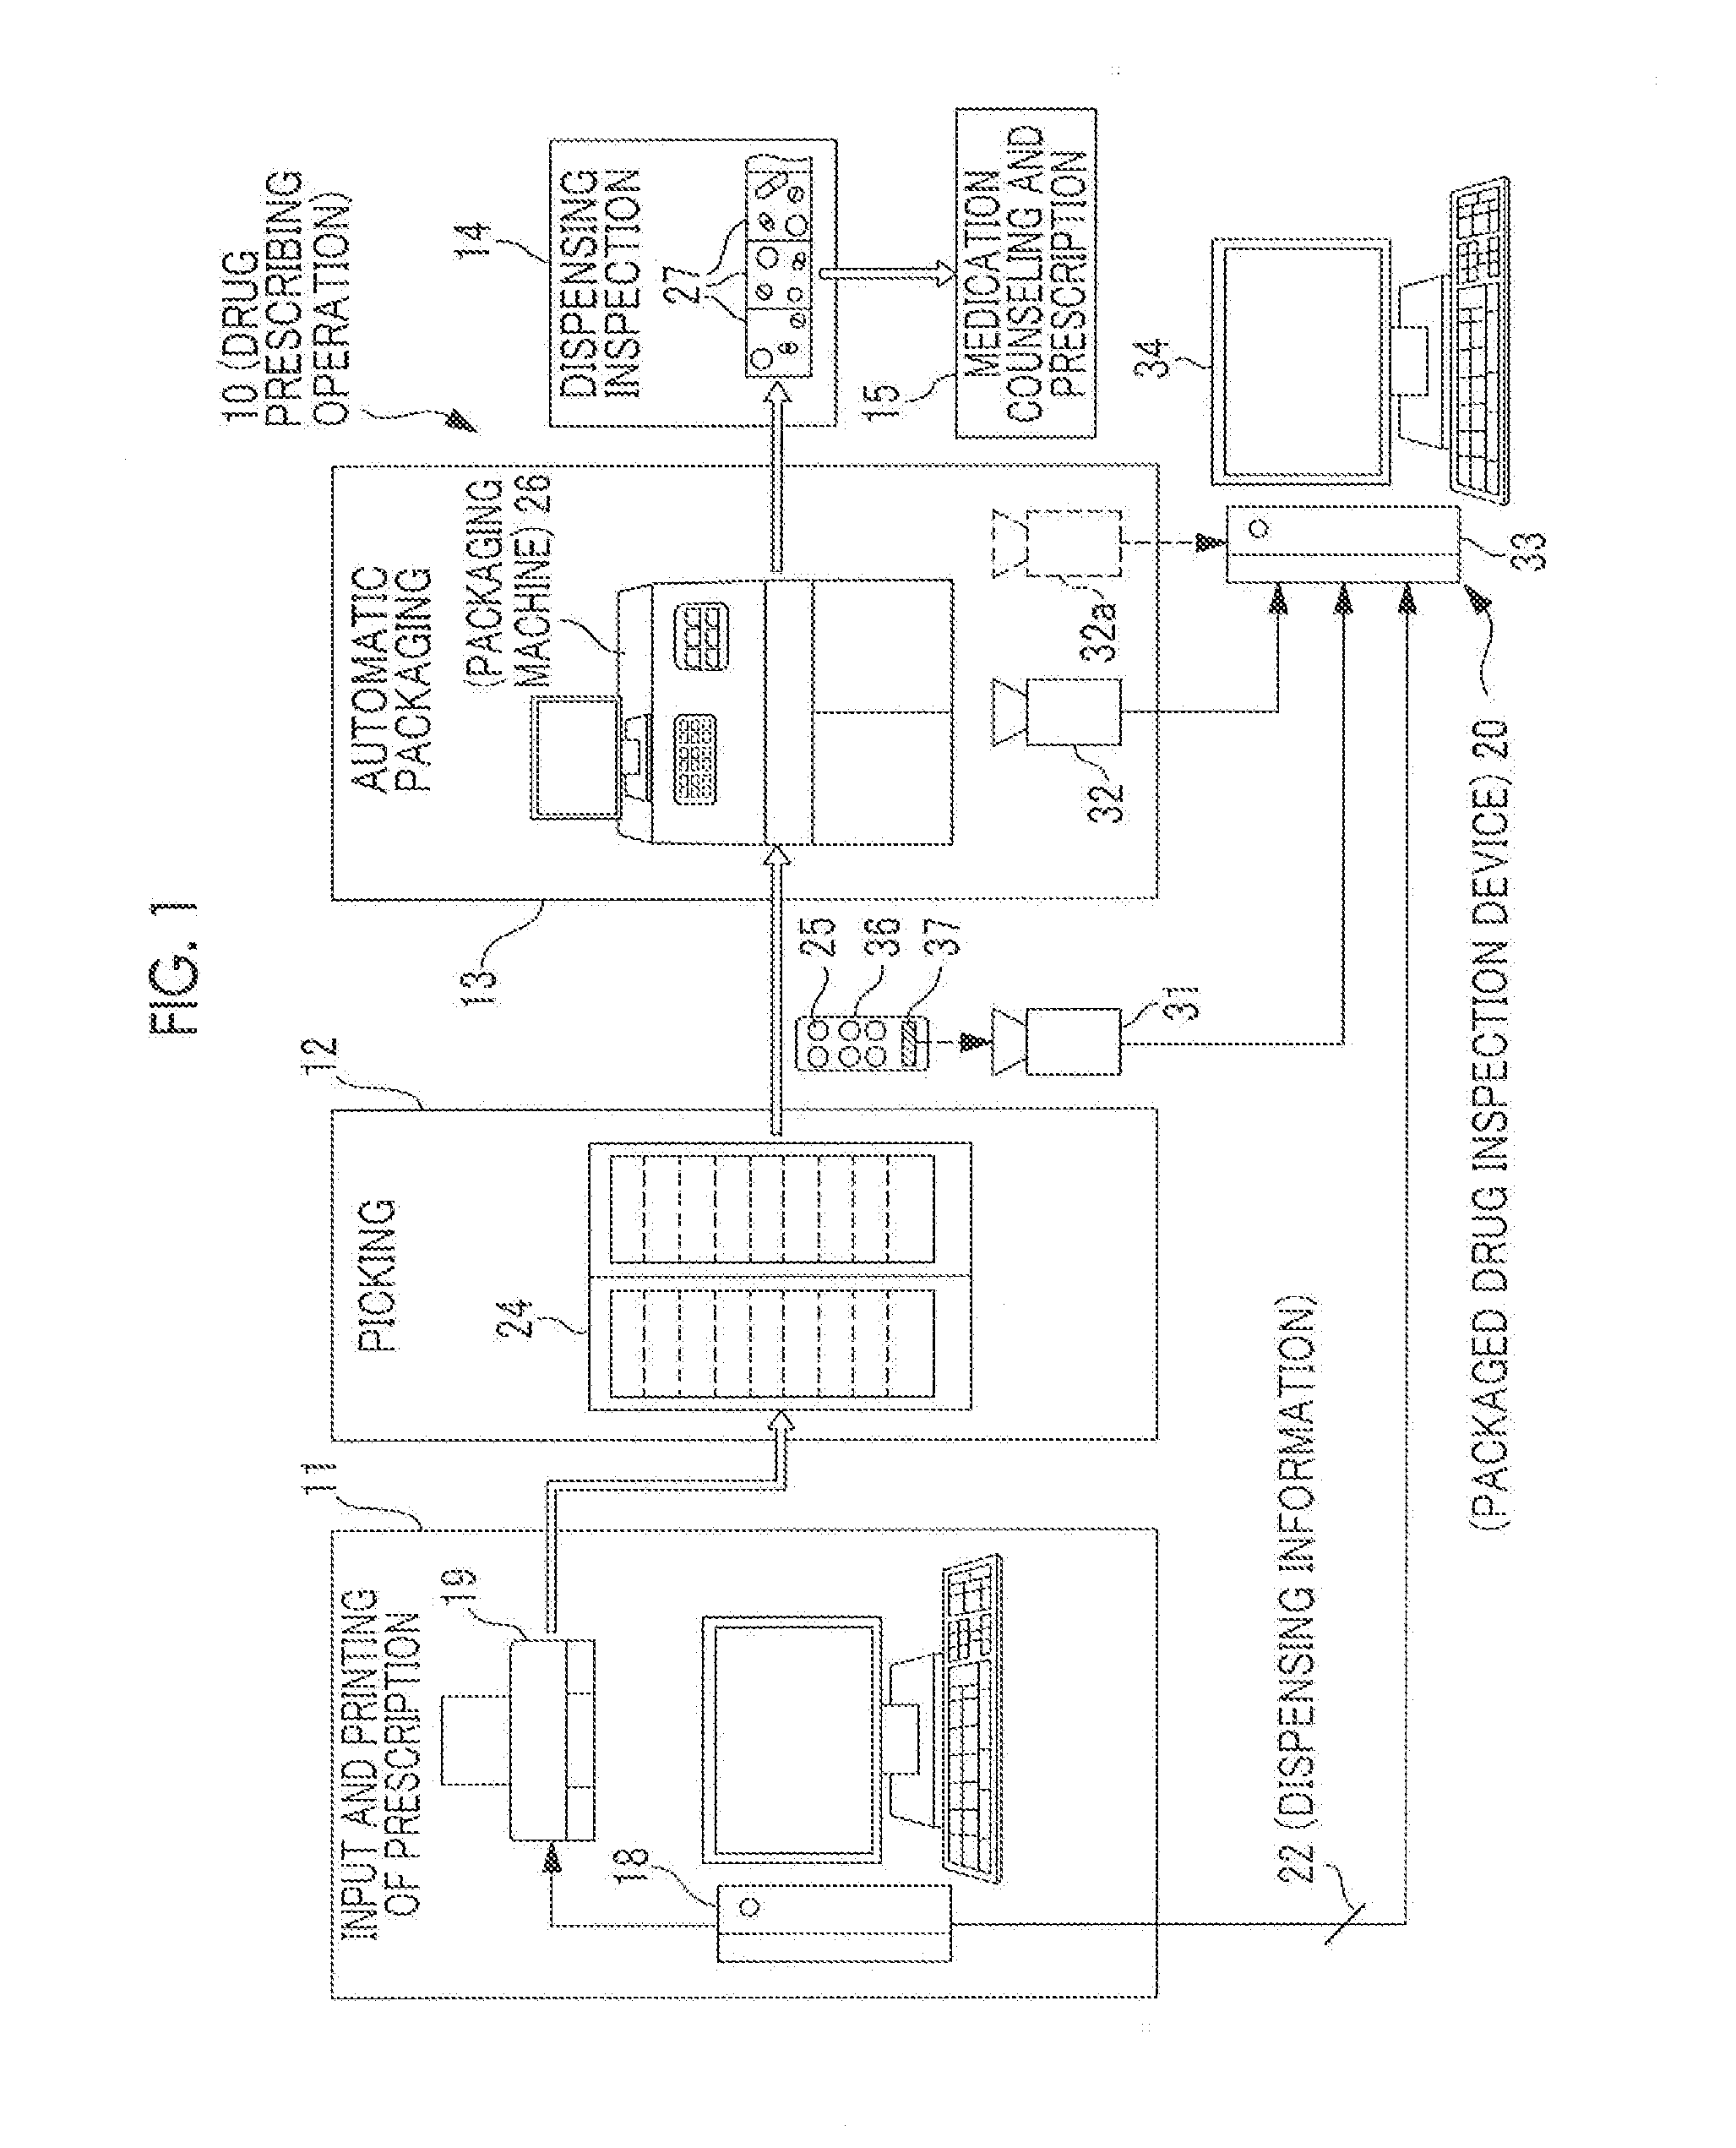 Packeted drug inspection device and method